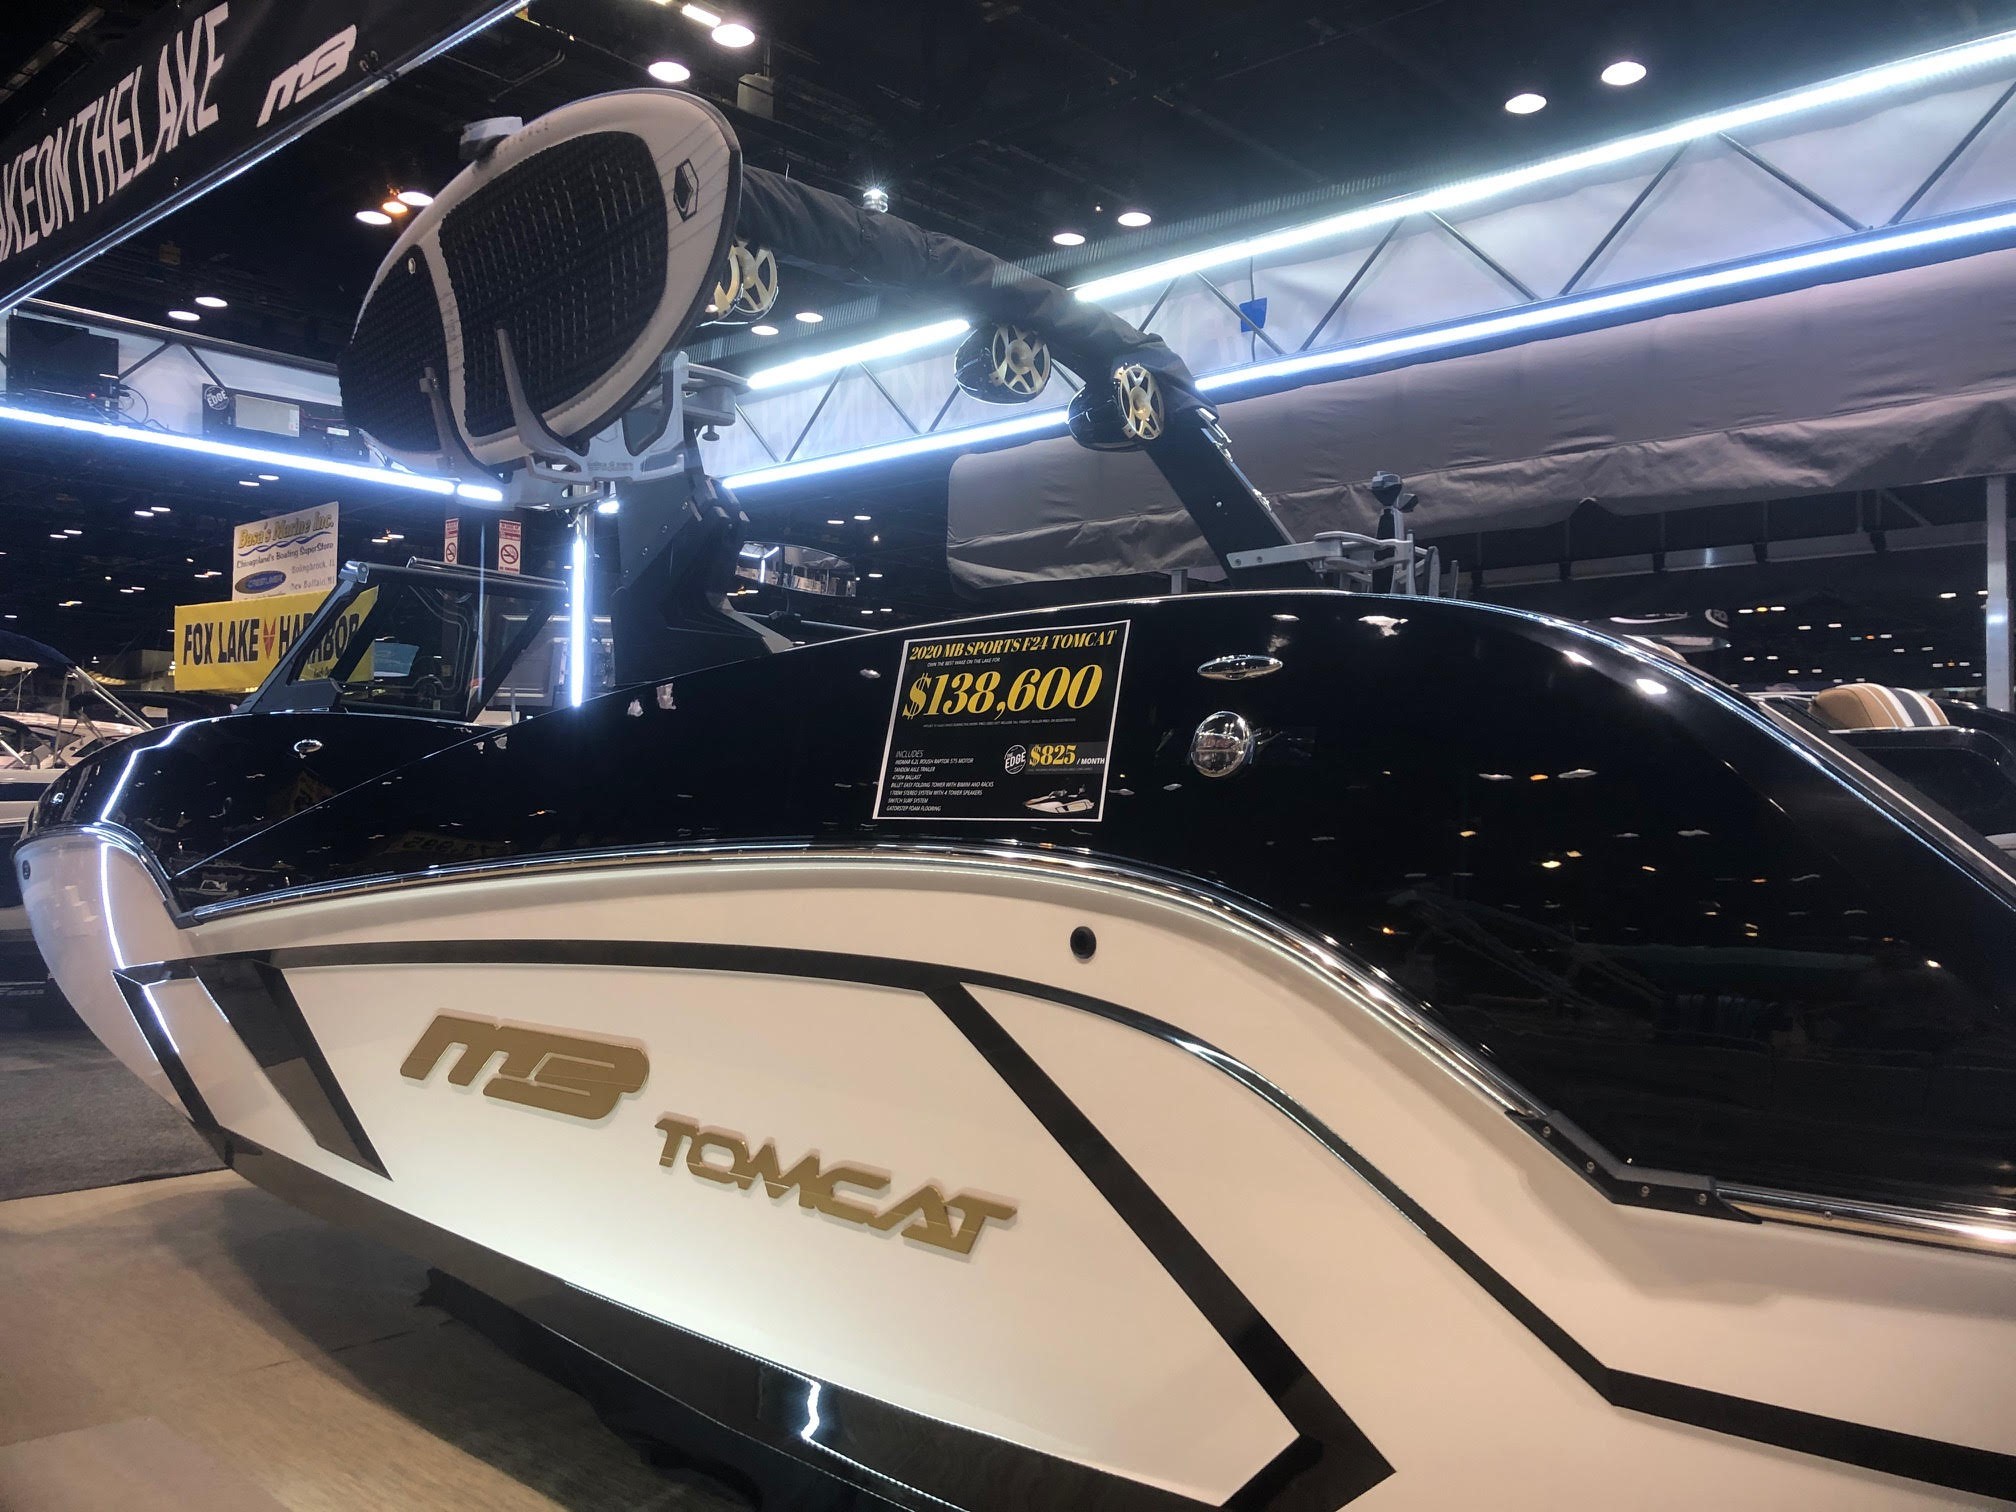 discount boat show